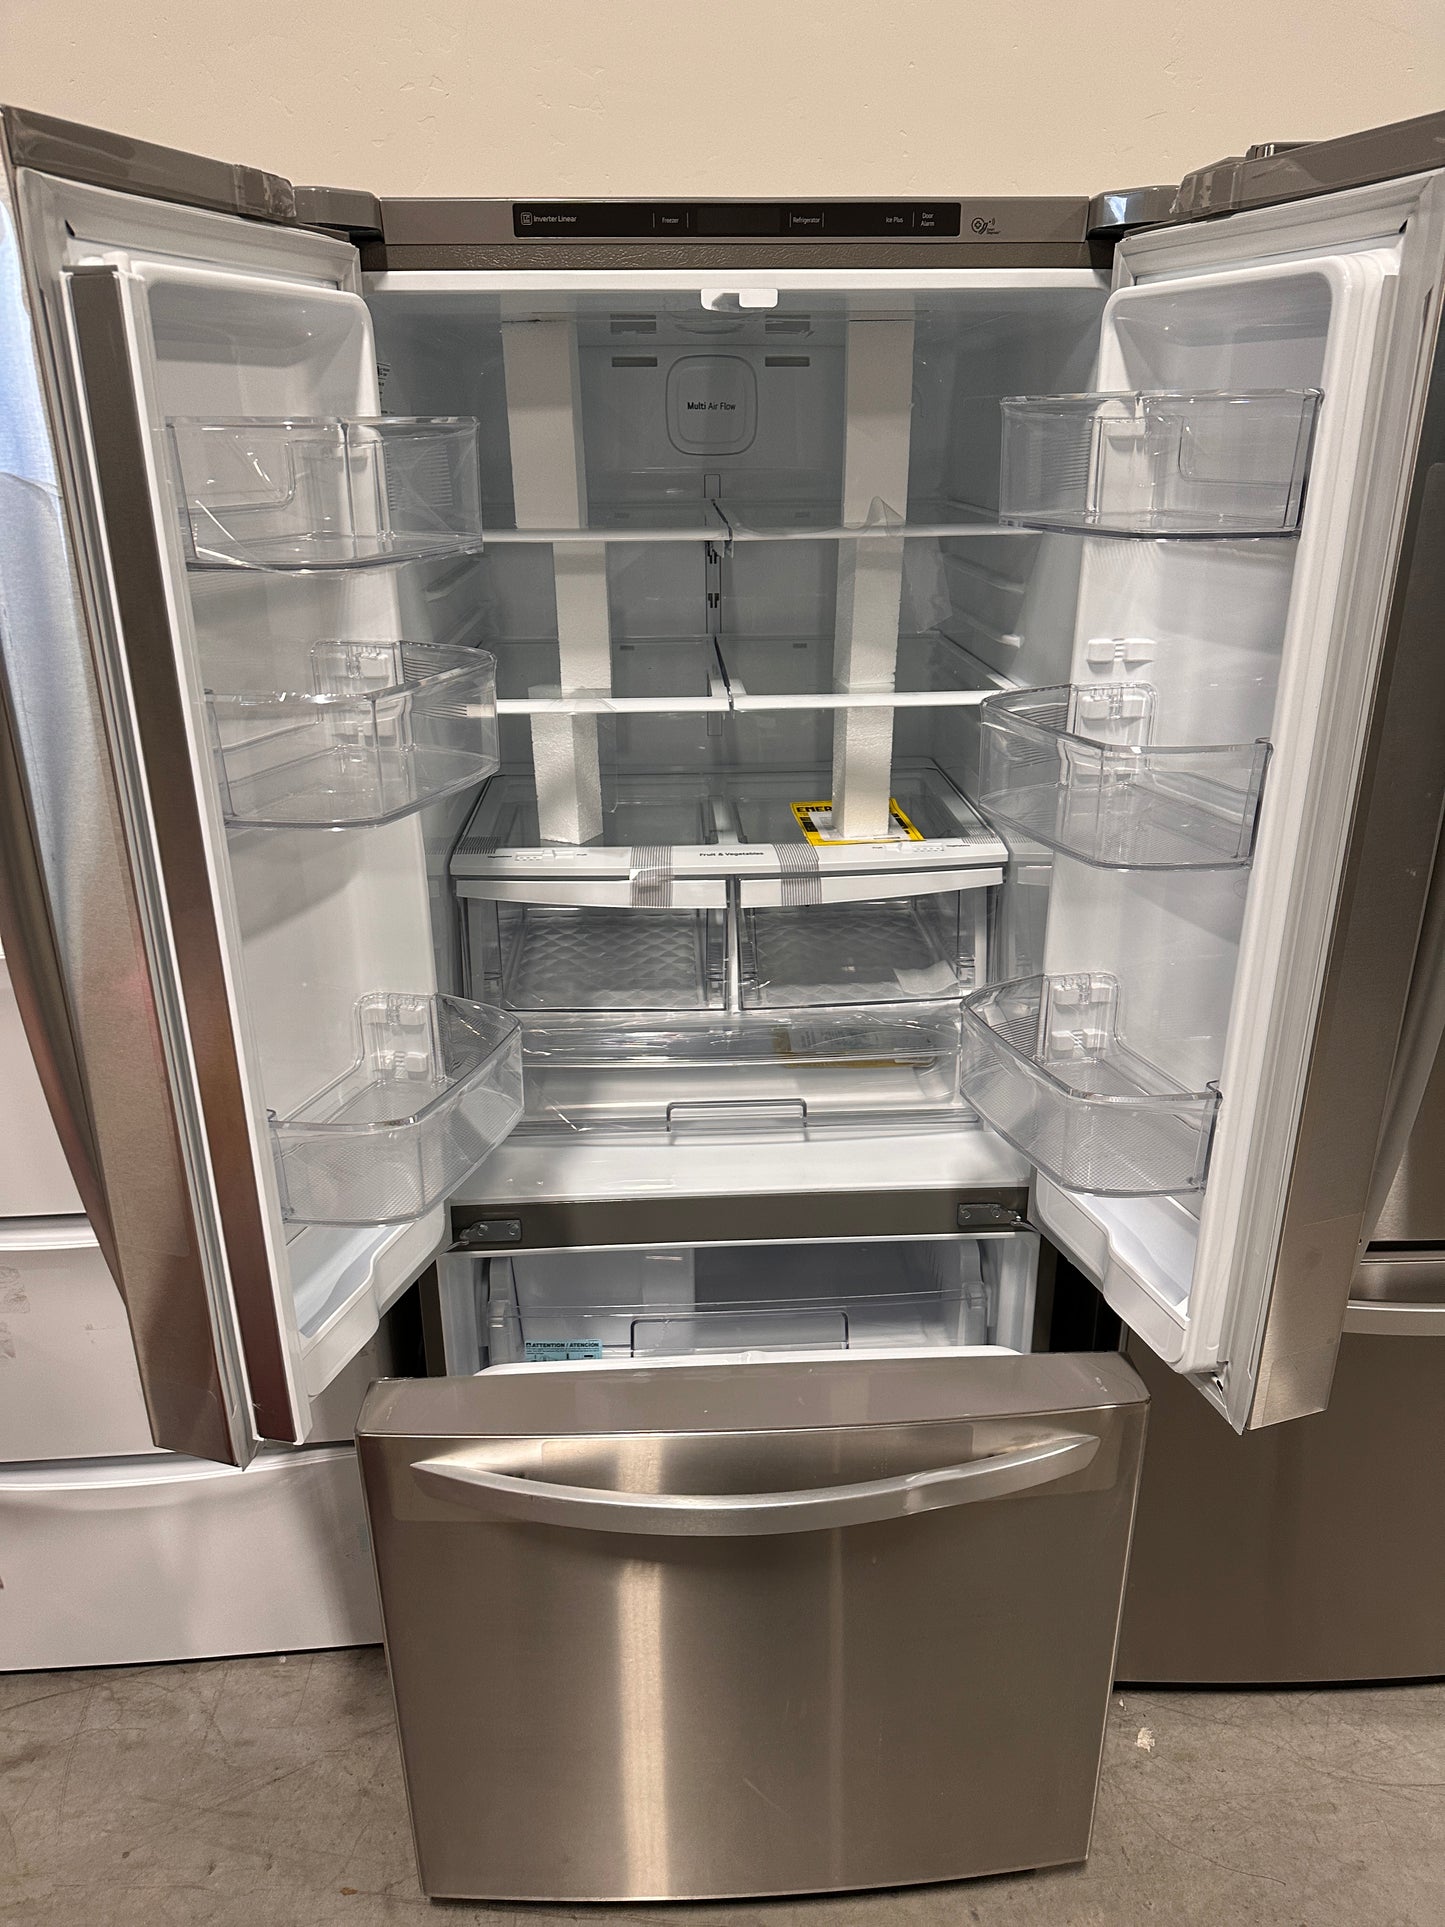 LG - 21.8 Cu. Ft. French Door Refrigerator - Stainless steel  Model:LFCS22520S  REF12713